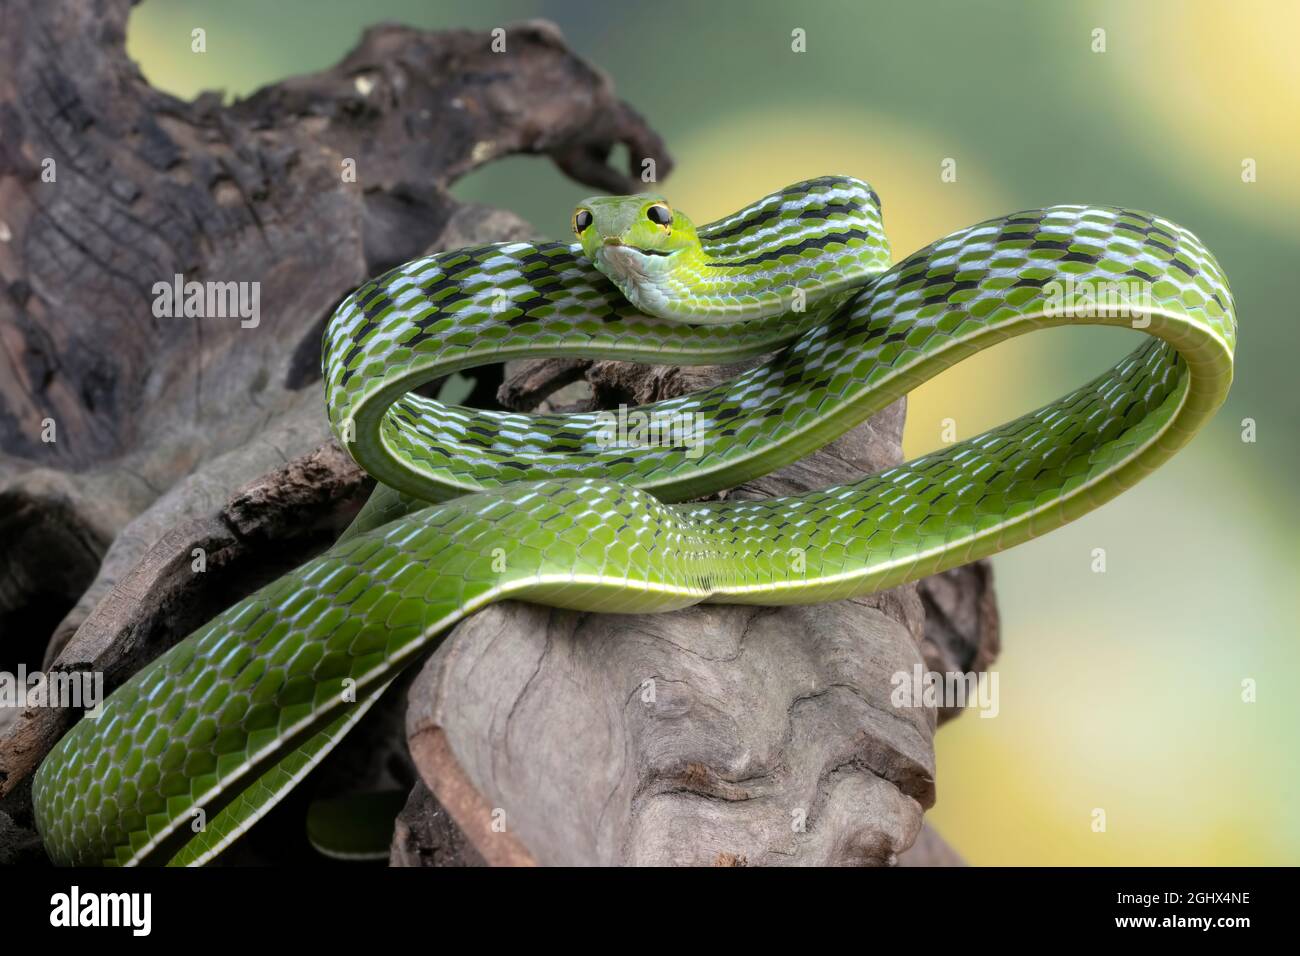 Close-up of an Asian vine snake on a tree, Indonesia Stock Photo